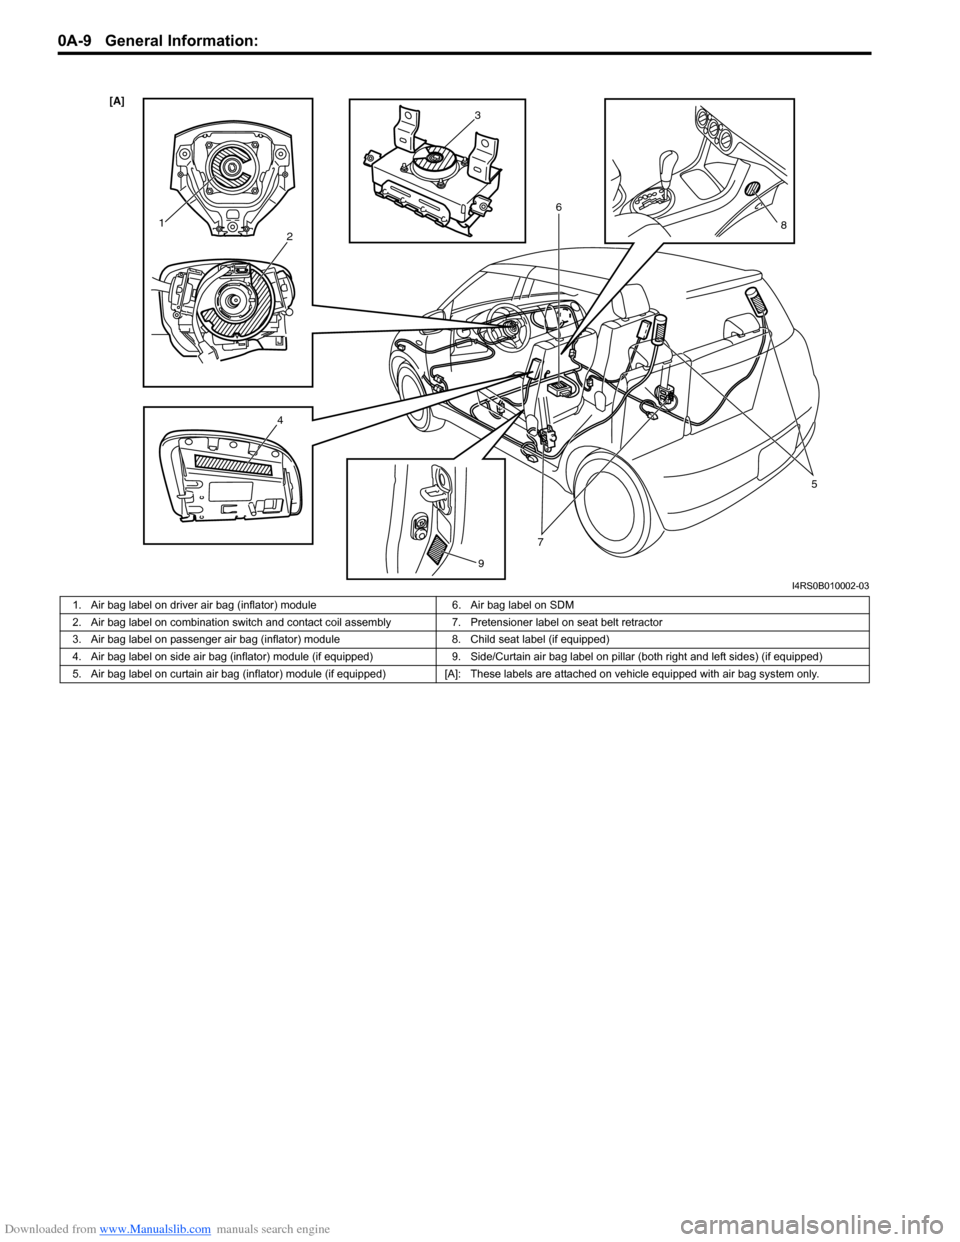 SUZUKI SWIFT 2005 2.G Service Workshop Manual Downloaded from www.Manualslib.com manuals search engine 0A-9 General Information: 
[A] 
12
4 5
6
7 8
9
3
I4RS0B010002-03
1. Air bag label on driver air bag (inflator) module 6. Air bag label on SDM
2